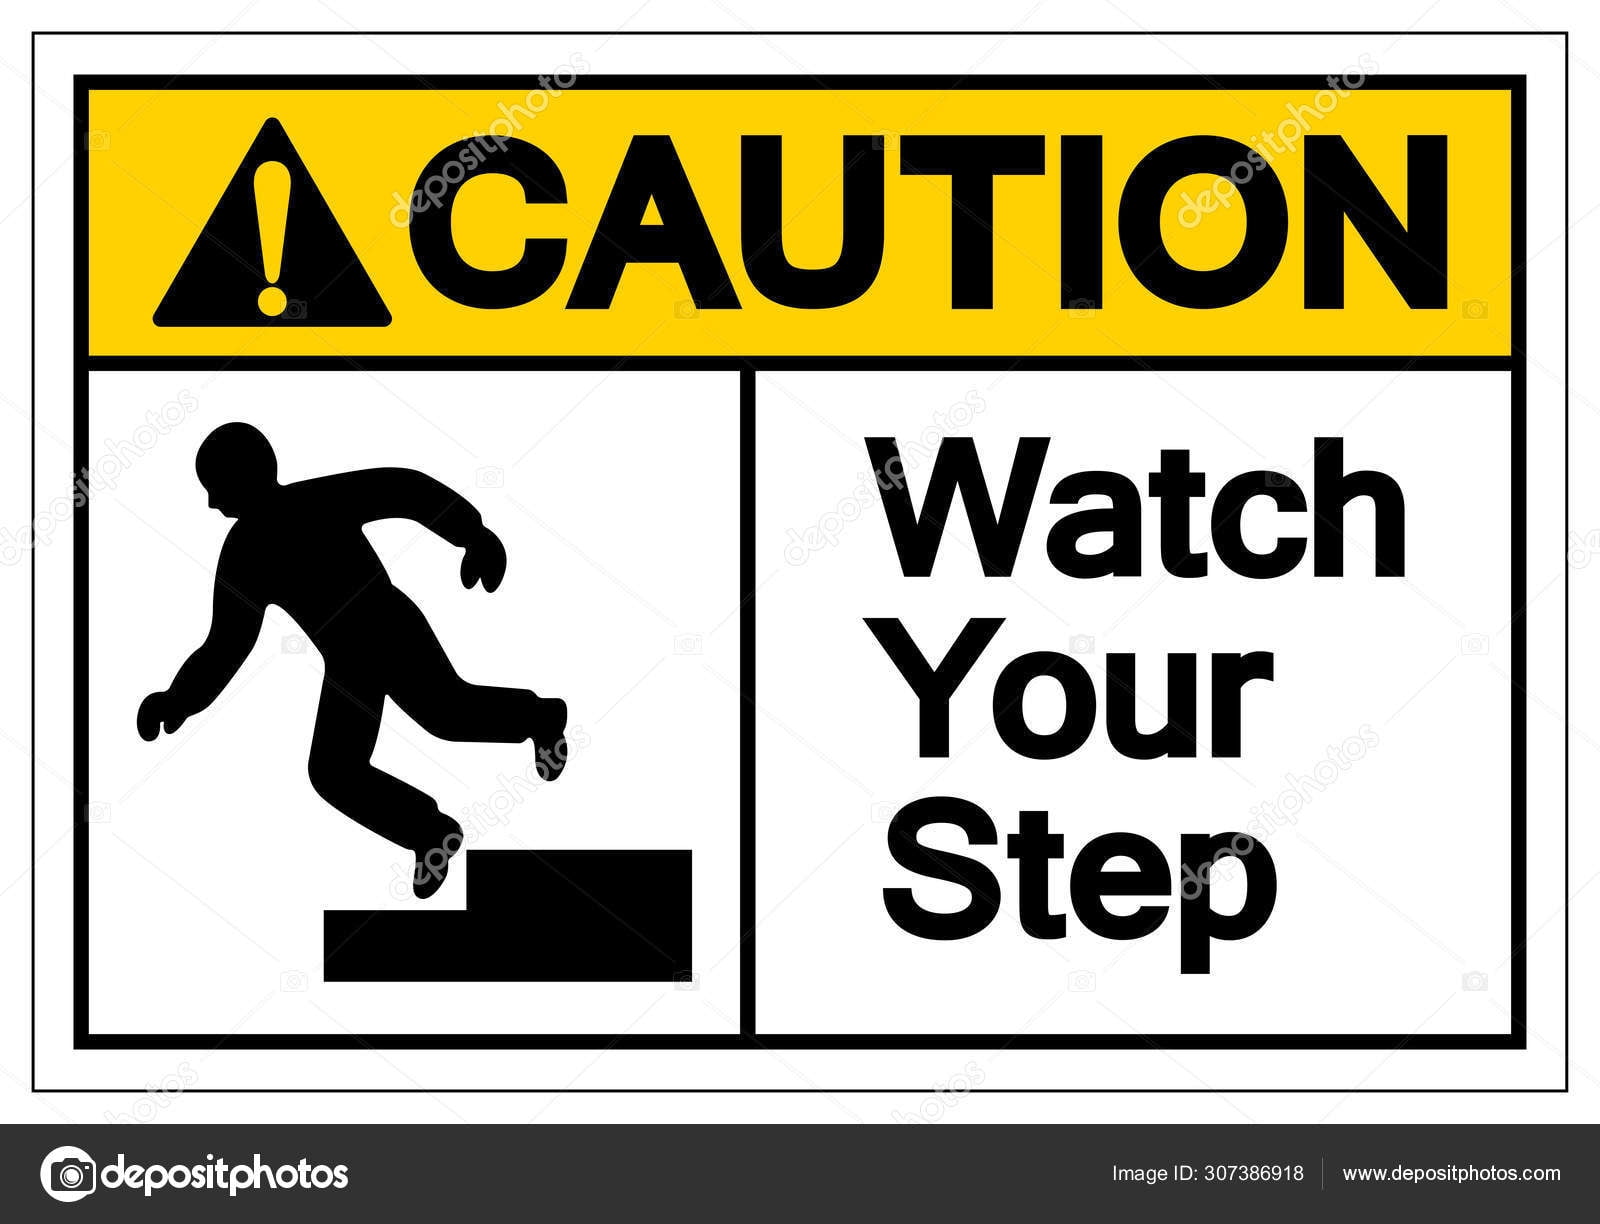 Caution Watch Your Step Symbol Sign Vector Illustration Isolated On White Background Label EPS10 Stock Vector Image By Technicsorn 307386918